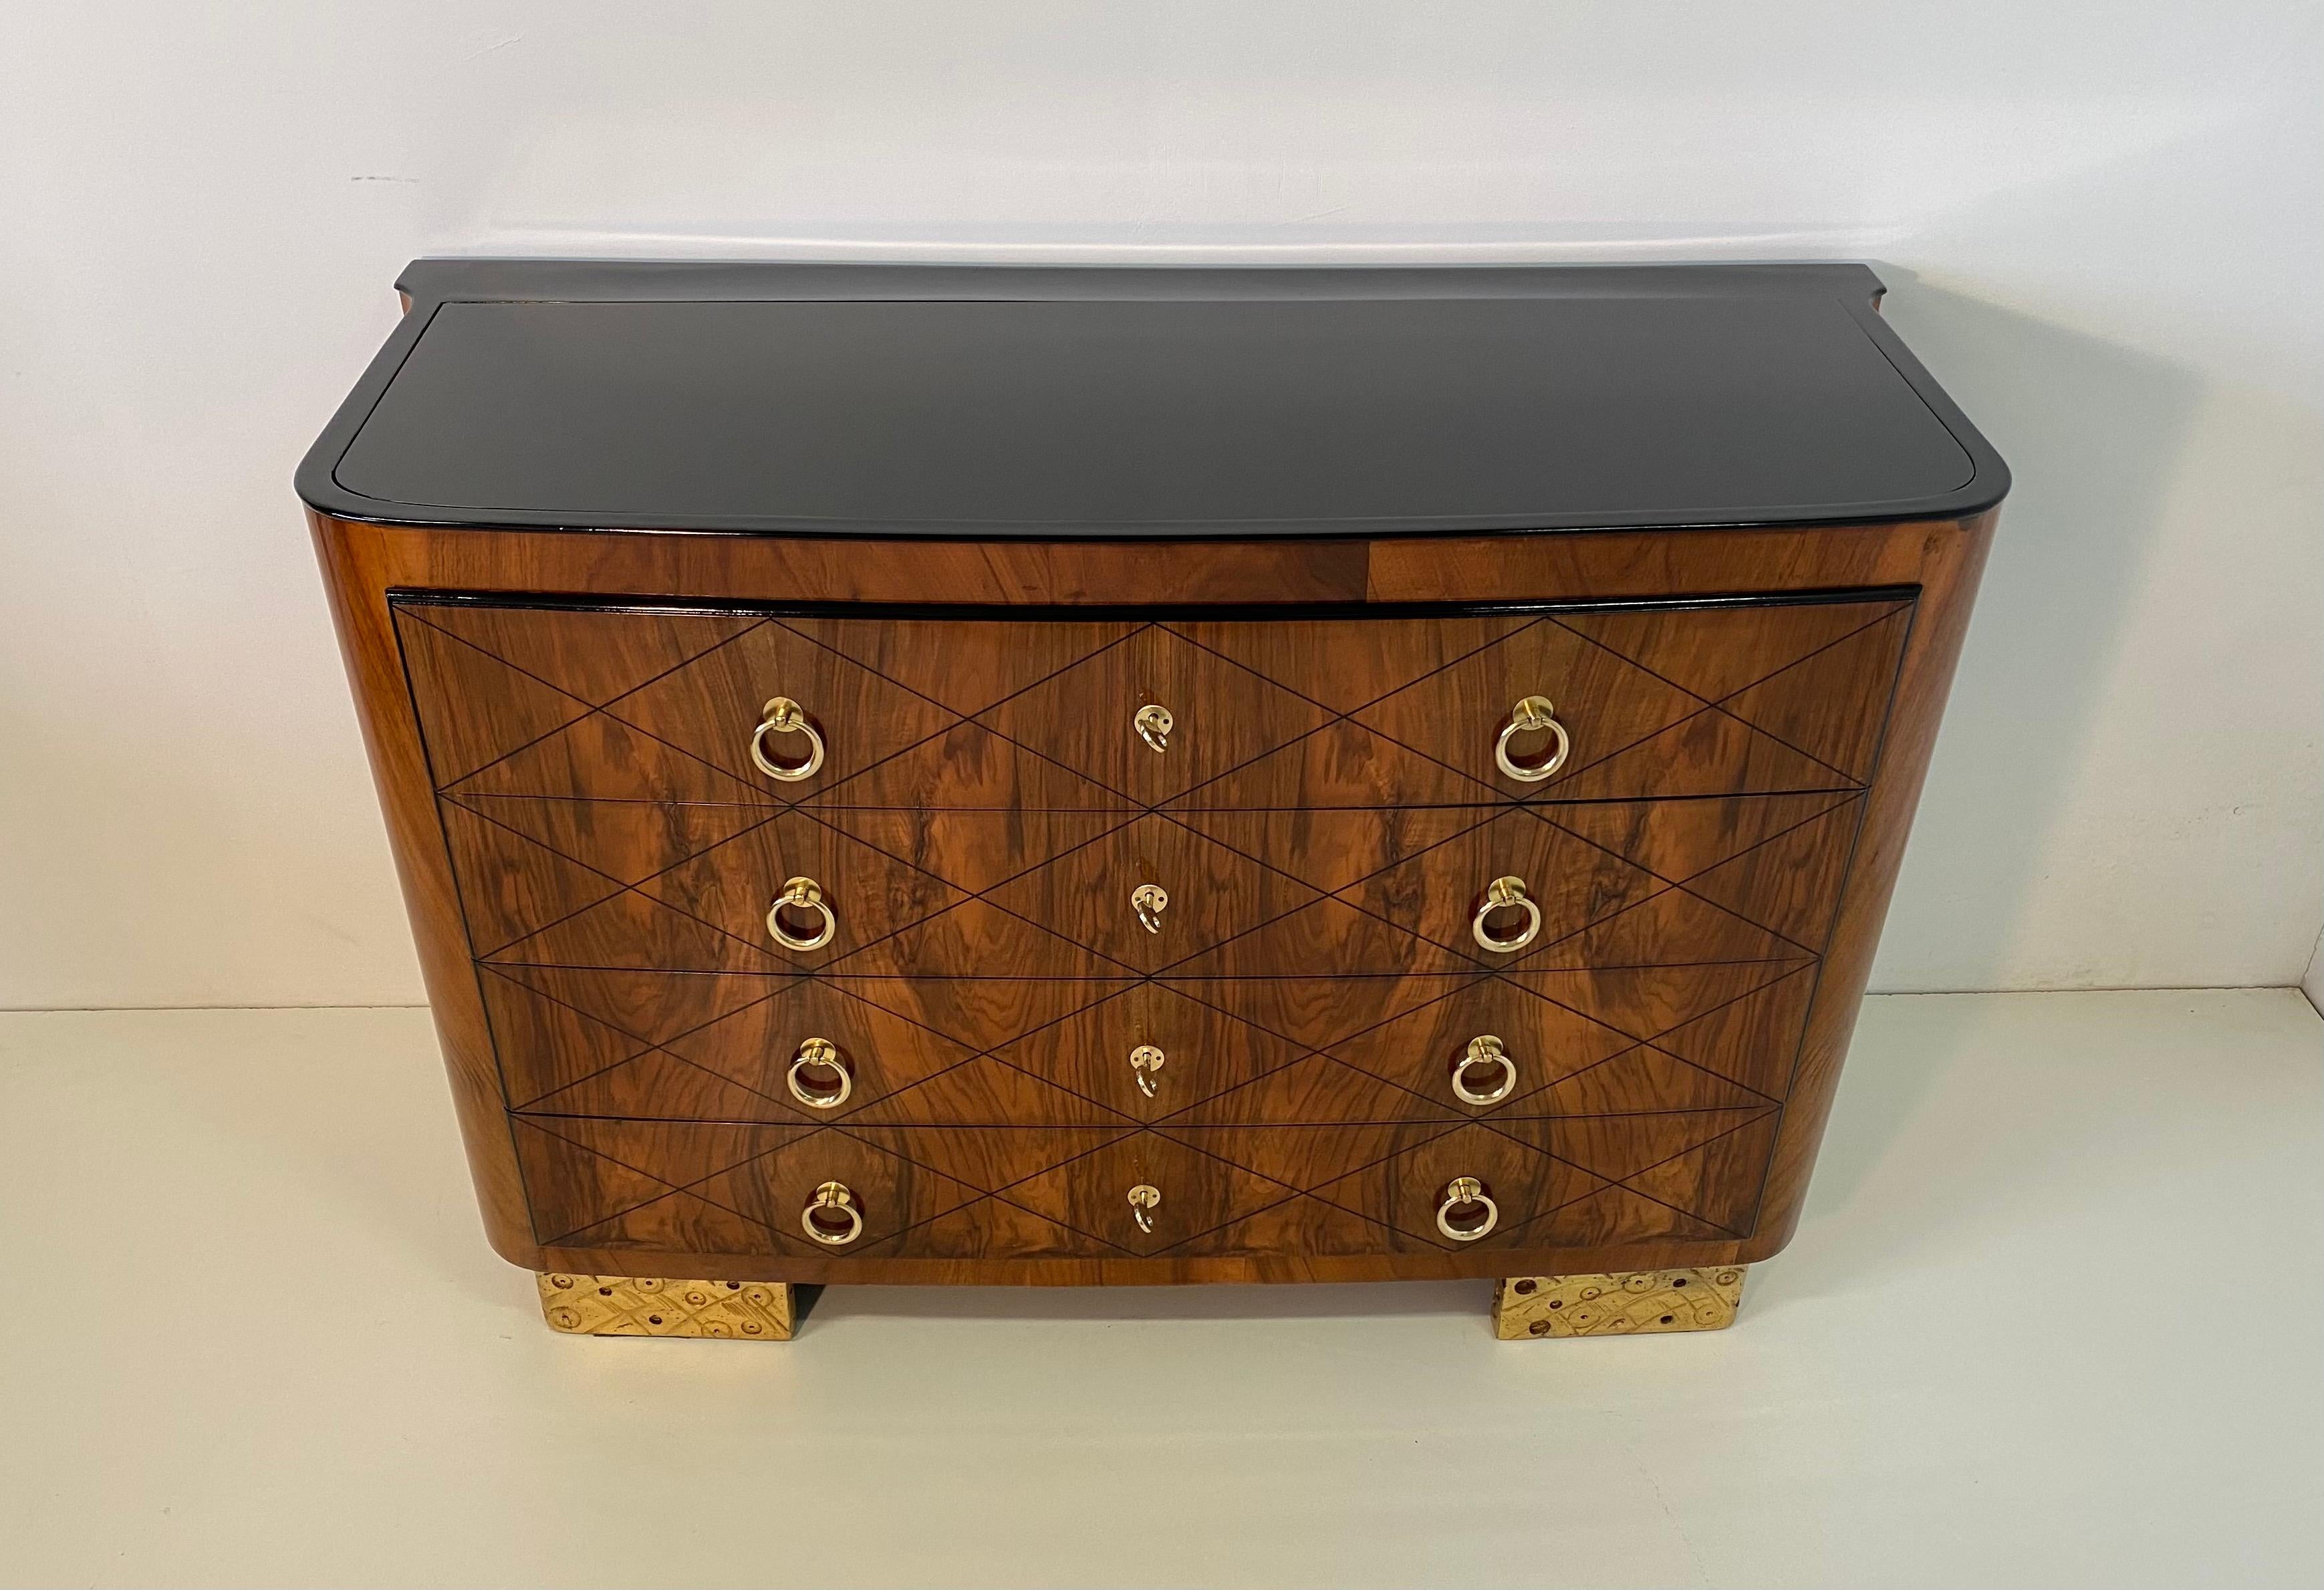 This chest of drawers was produced in Italy in the 1930s, it is completely covered in walnut briar while the top is in black glass with black lacquer details.
The front of the drawers is decorated with a Classic geometric pattern from the Art Deco